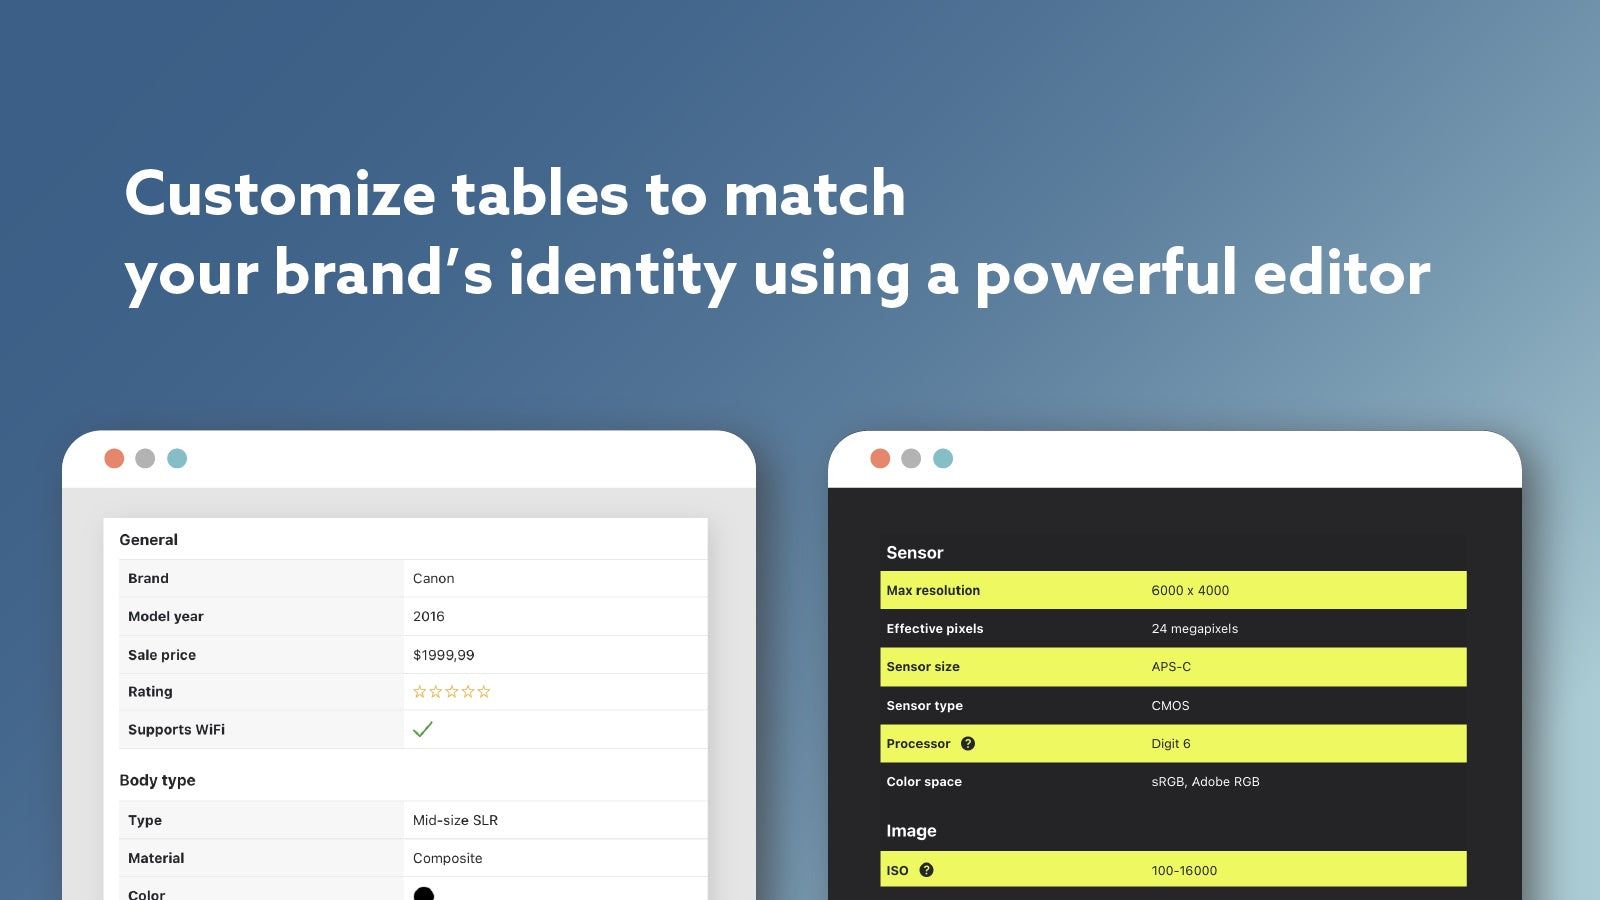 Customize tables to match your brand's identity